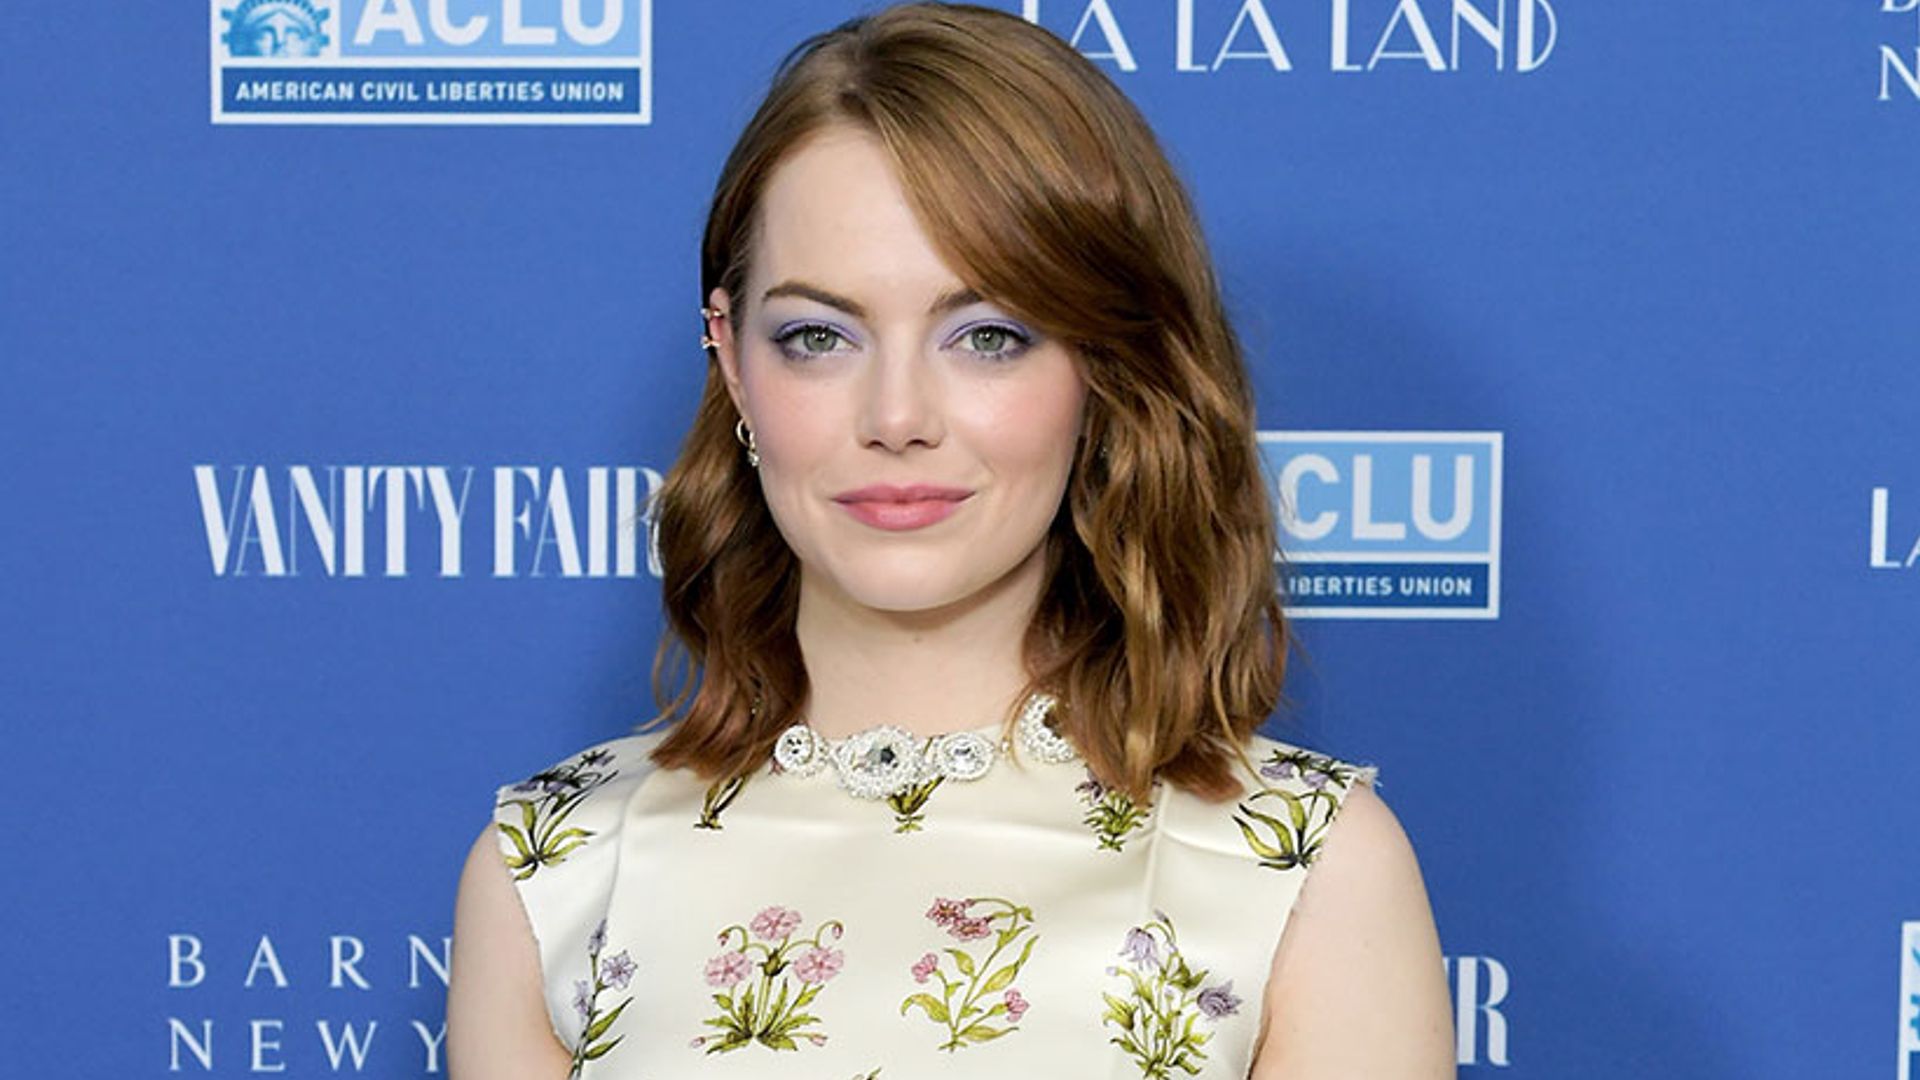 Emma Stone from a new  video for Child Mind Institute : r